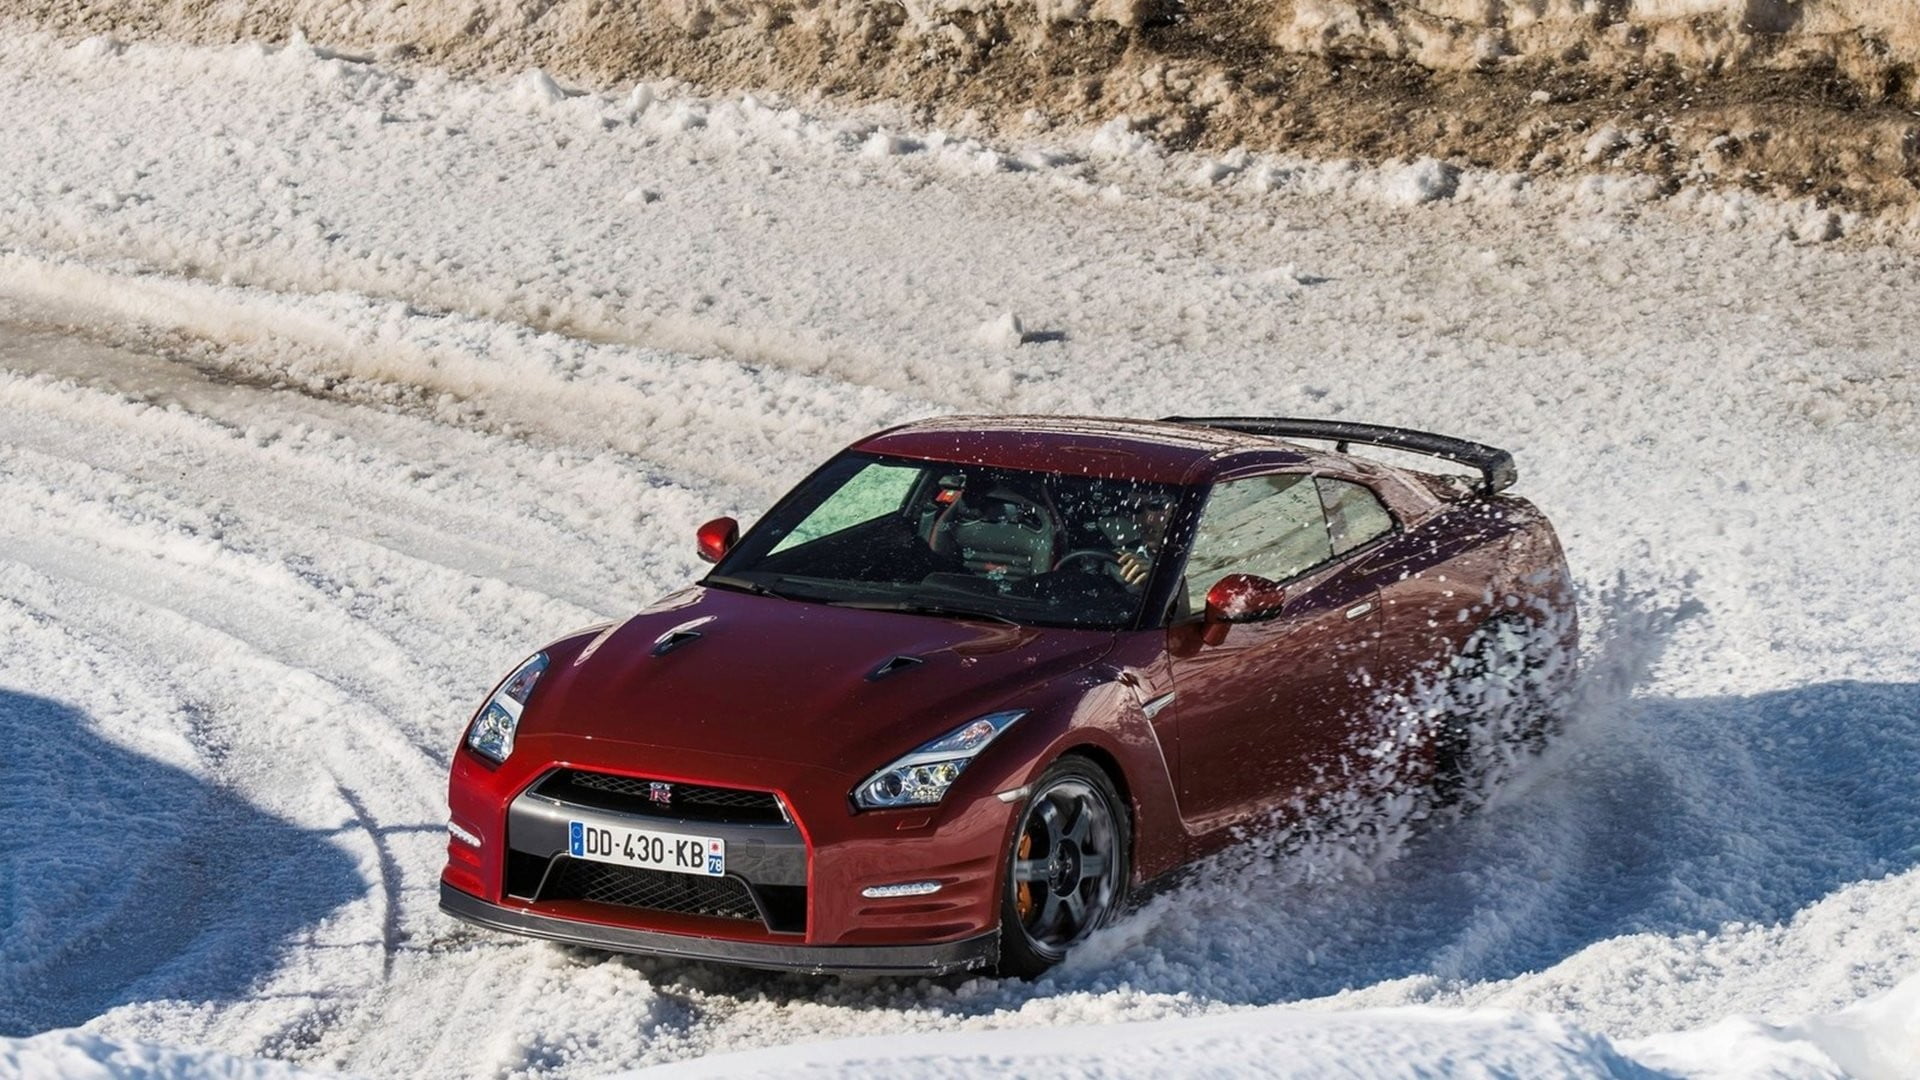 2015 red Nissan GT-R R35 coupe, Nissan, Nissan GT-R, winter, car HD ...